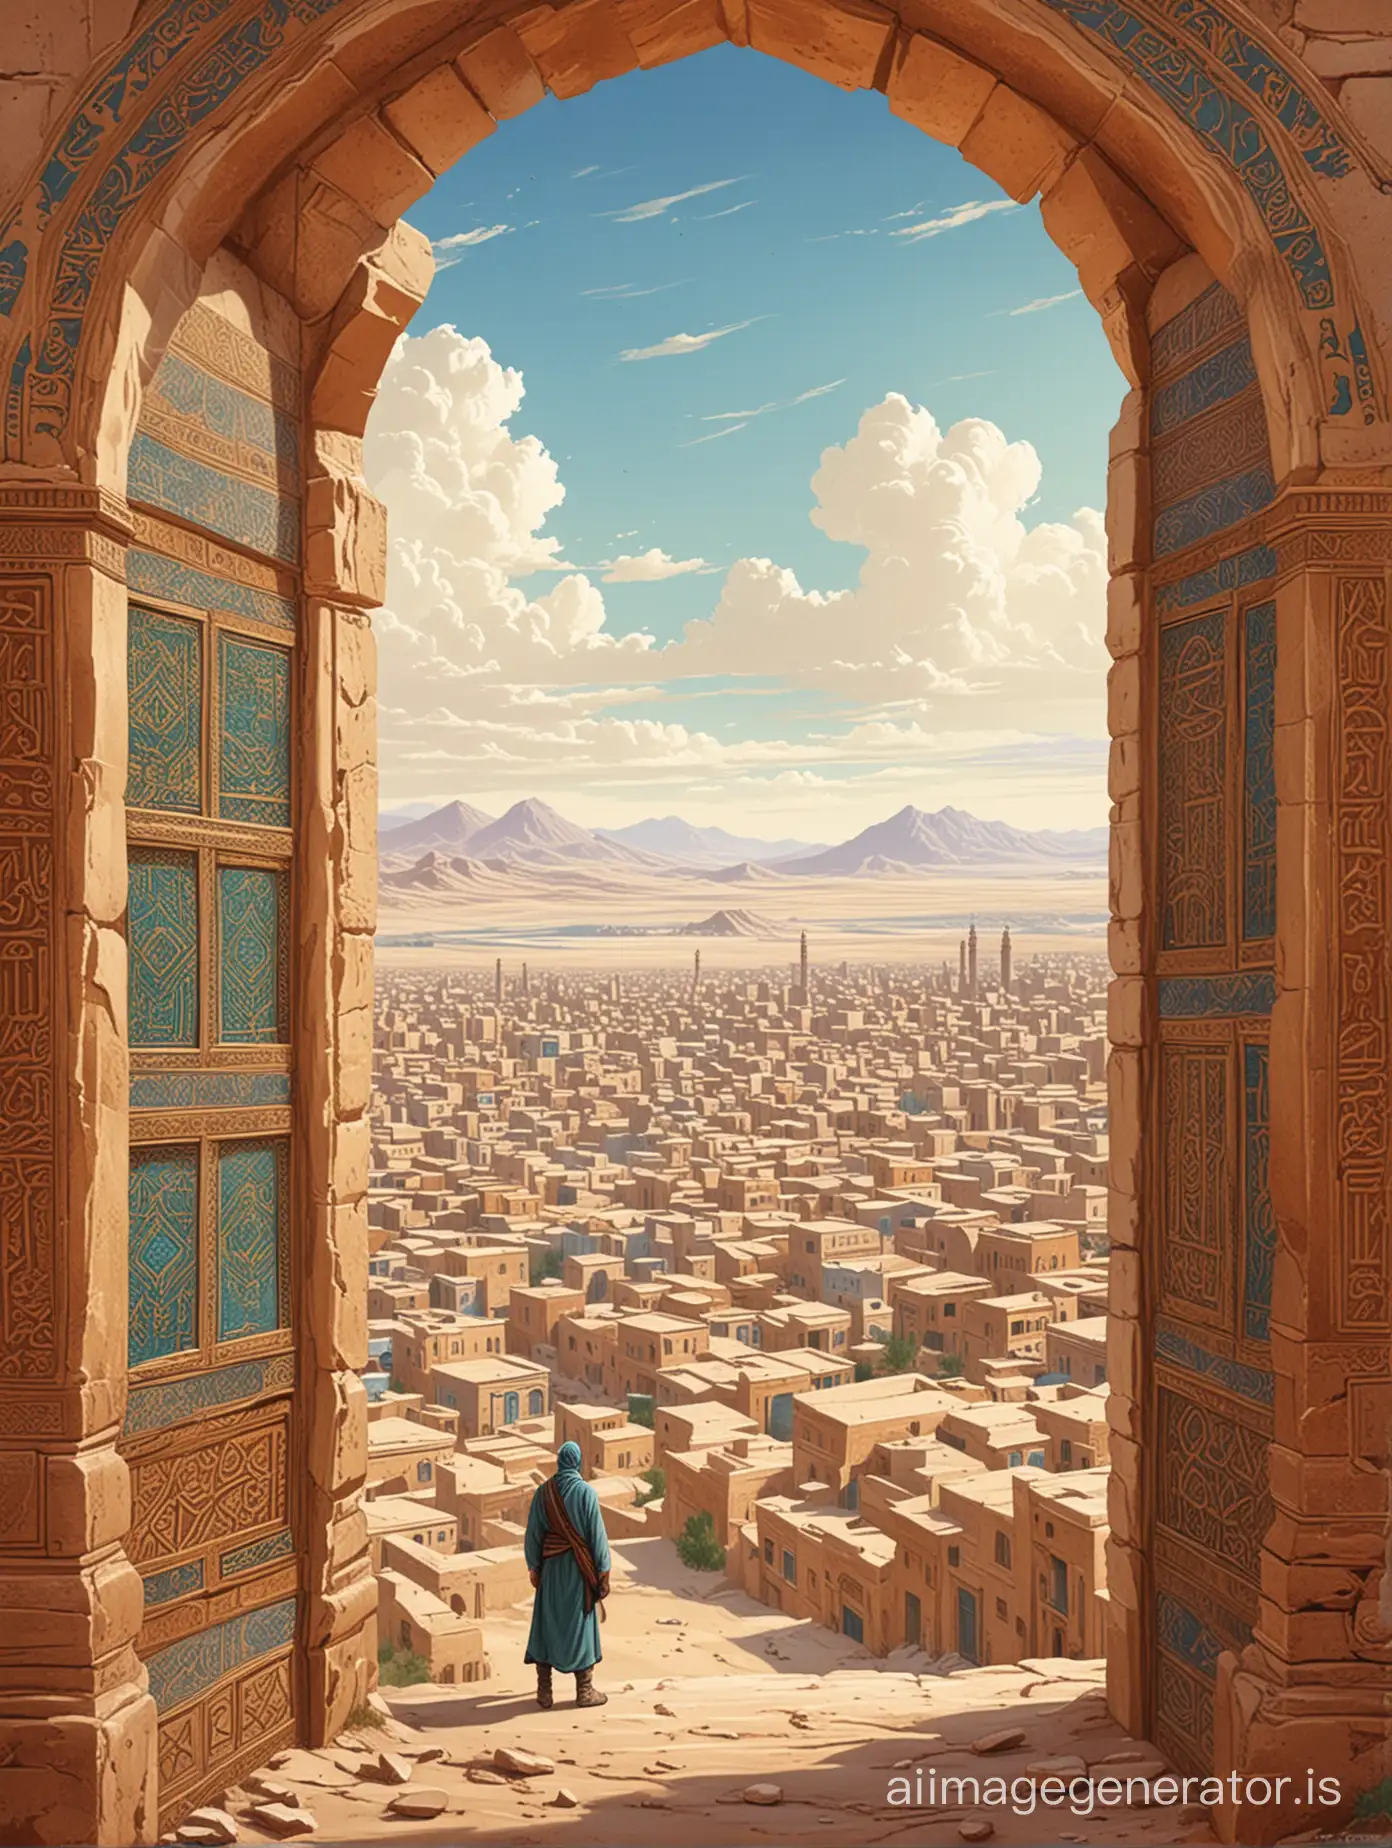 illustration for book cover.  in the background, the buildings of Khorezm can be seen in the distance.  In the ancient oriental style